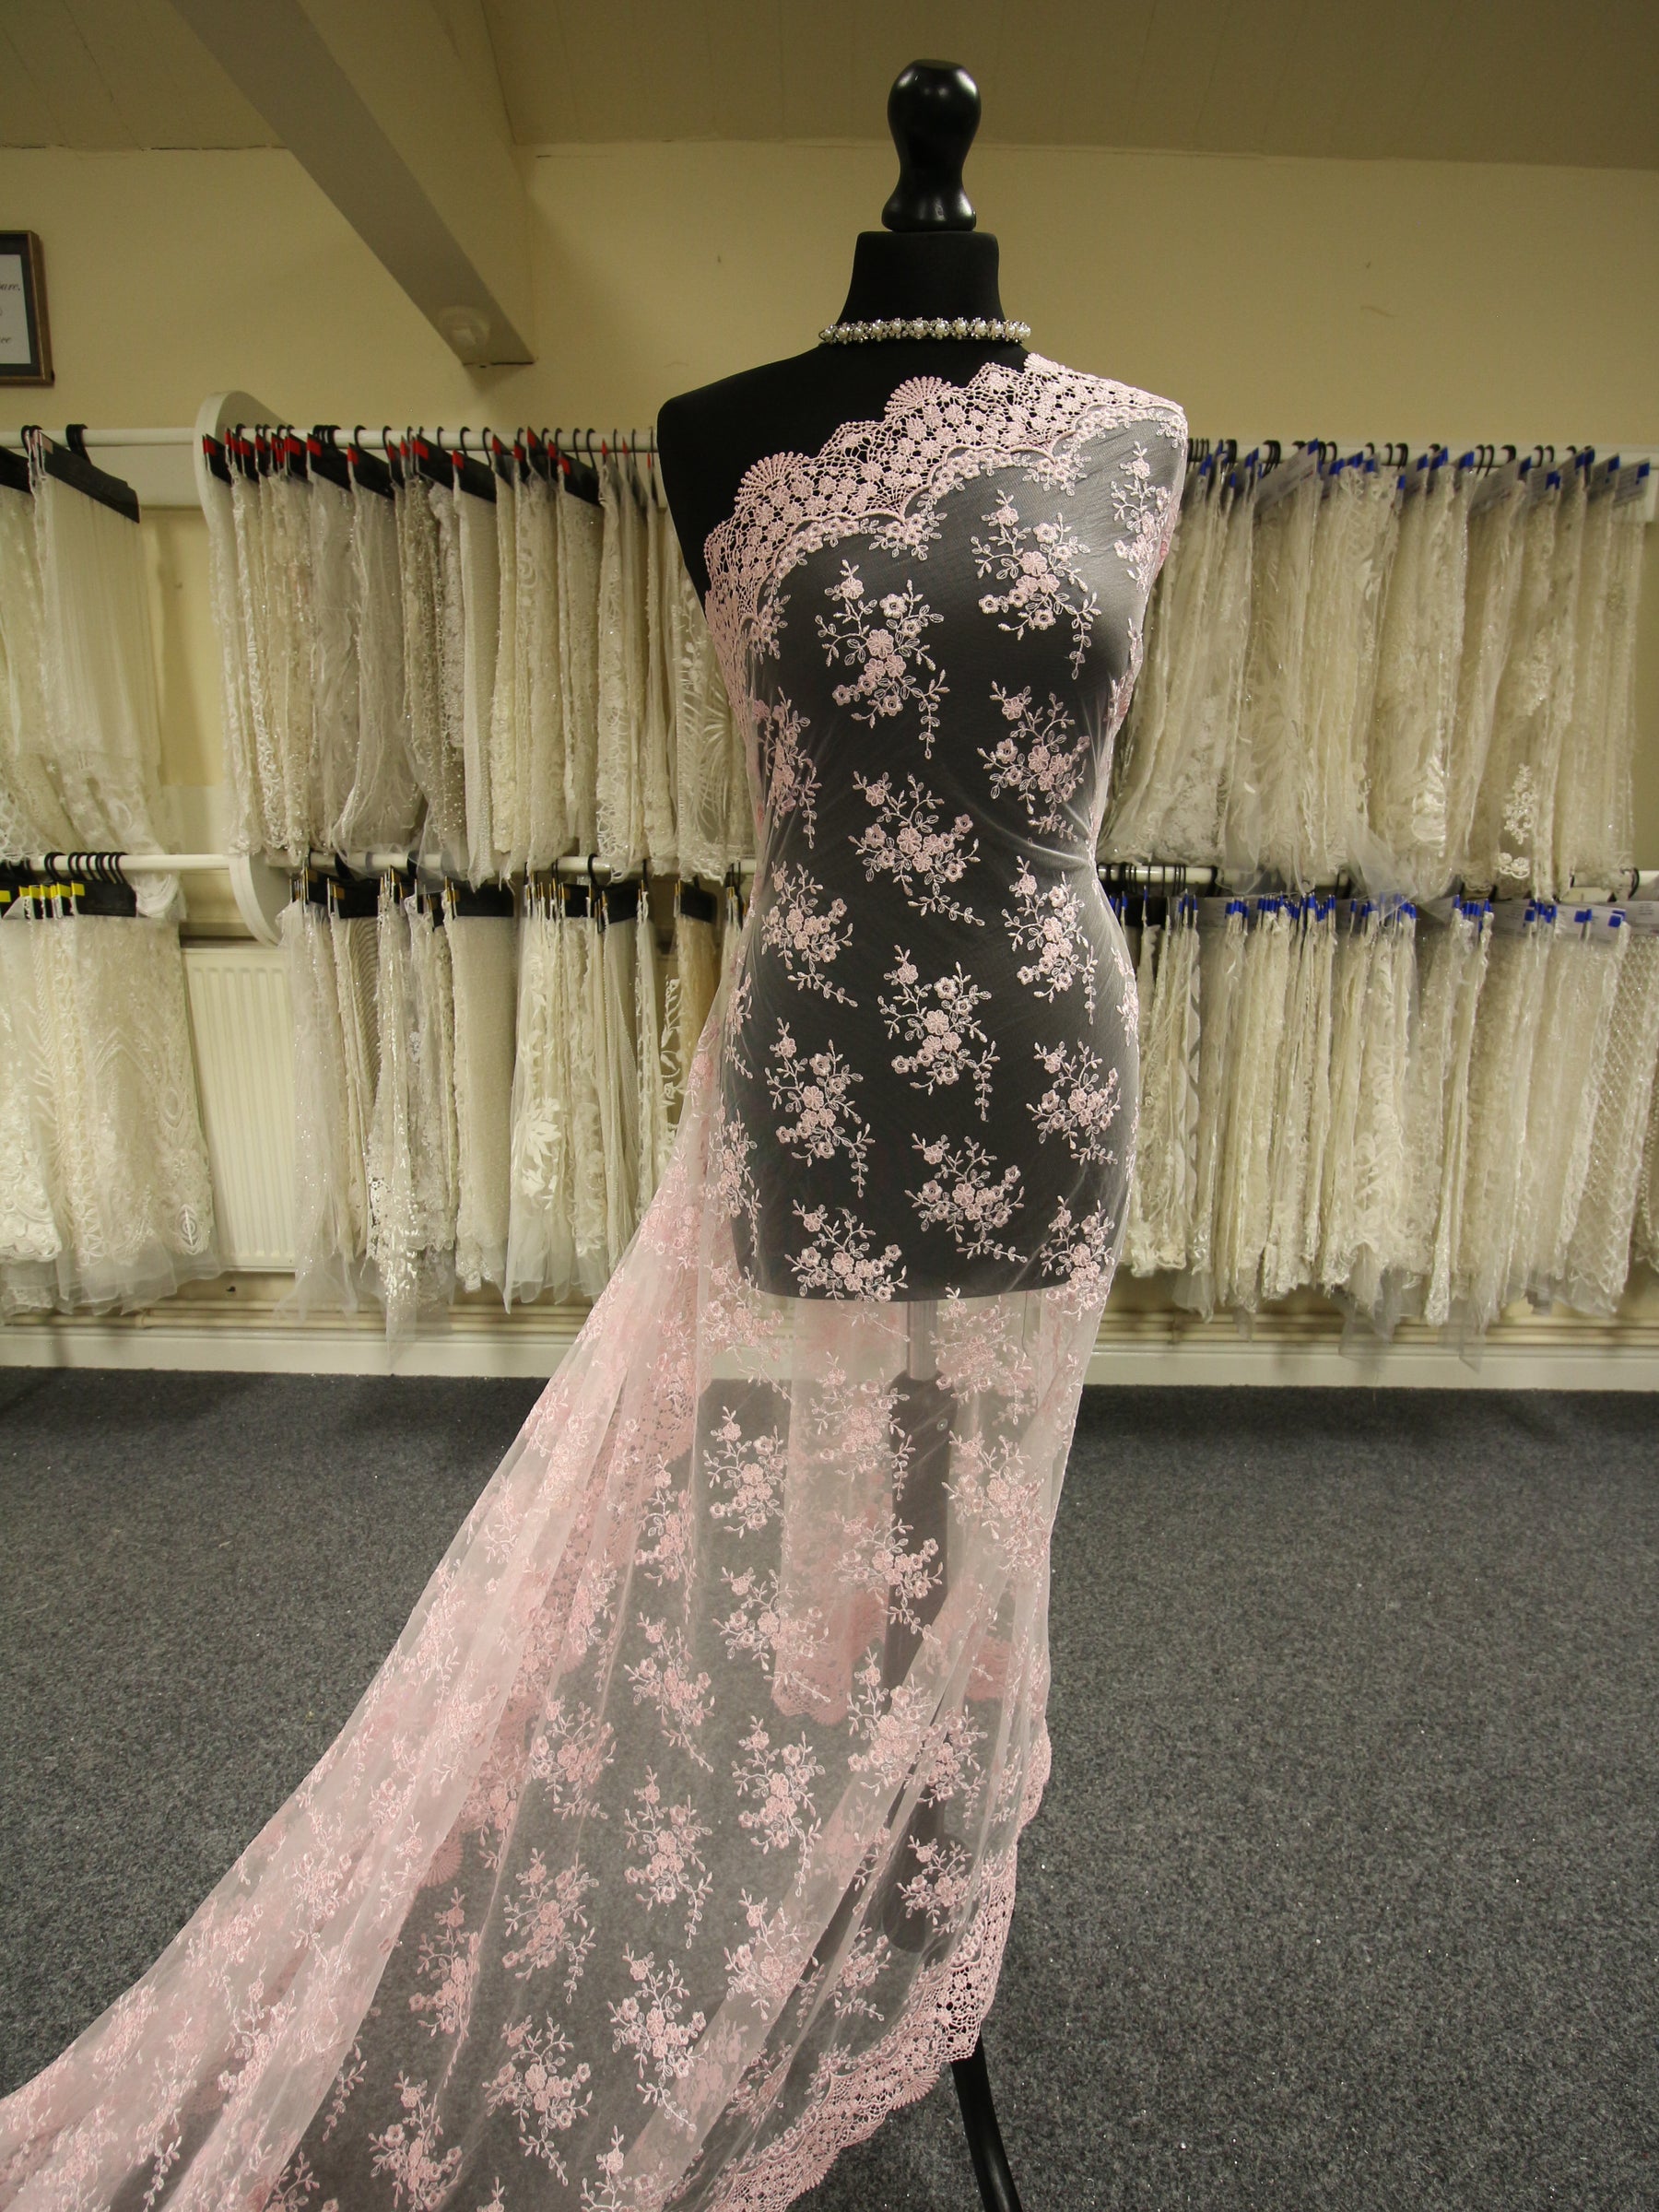 Pink Embroidered Lace - Kirsty